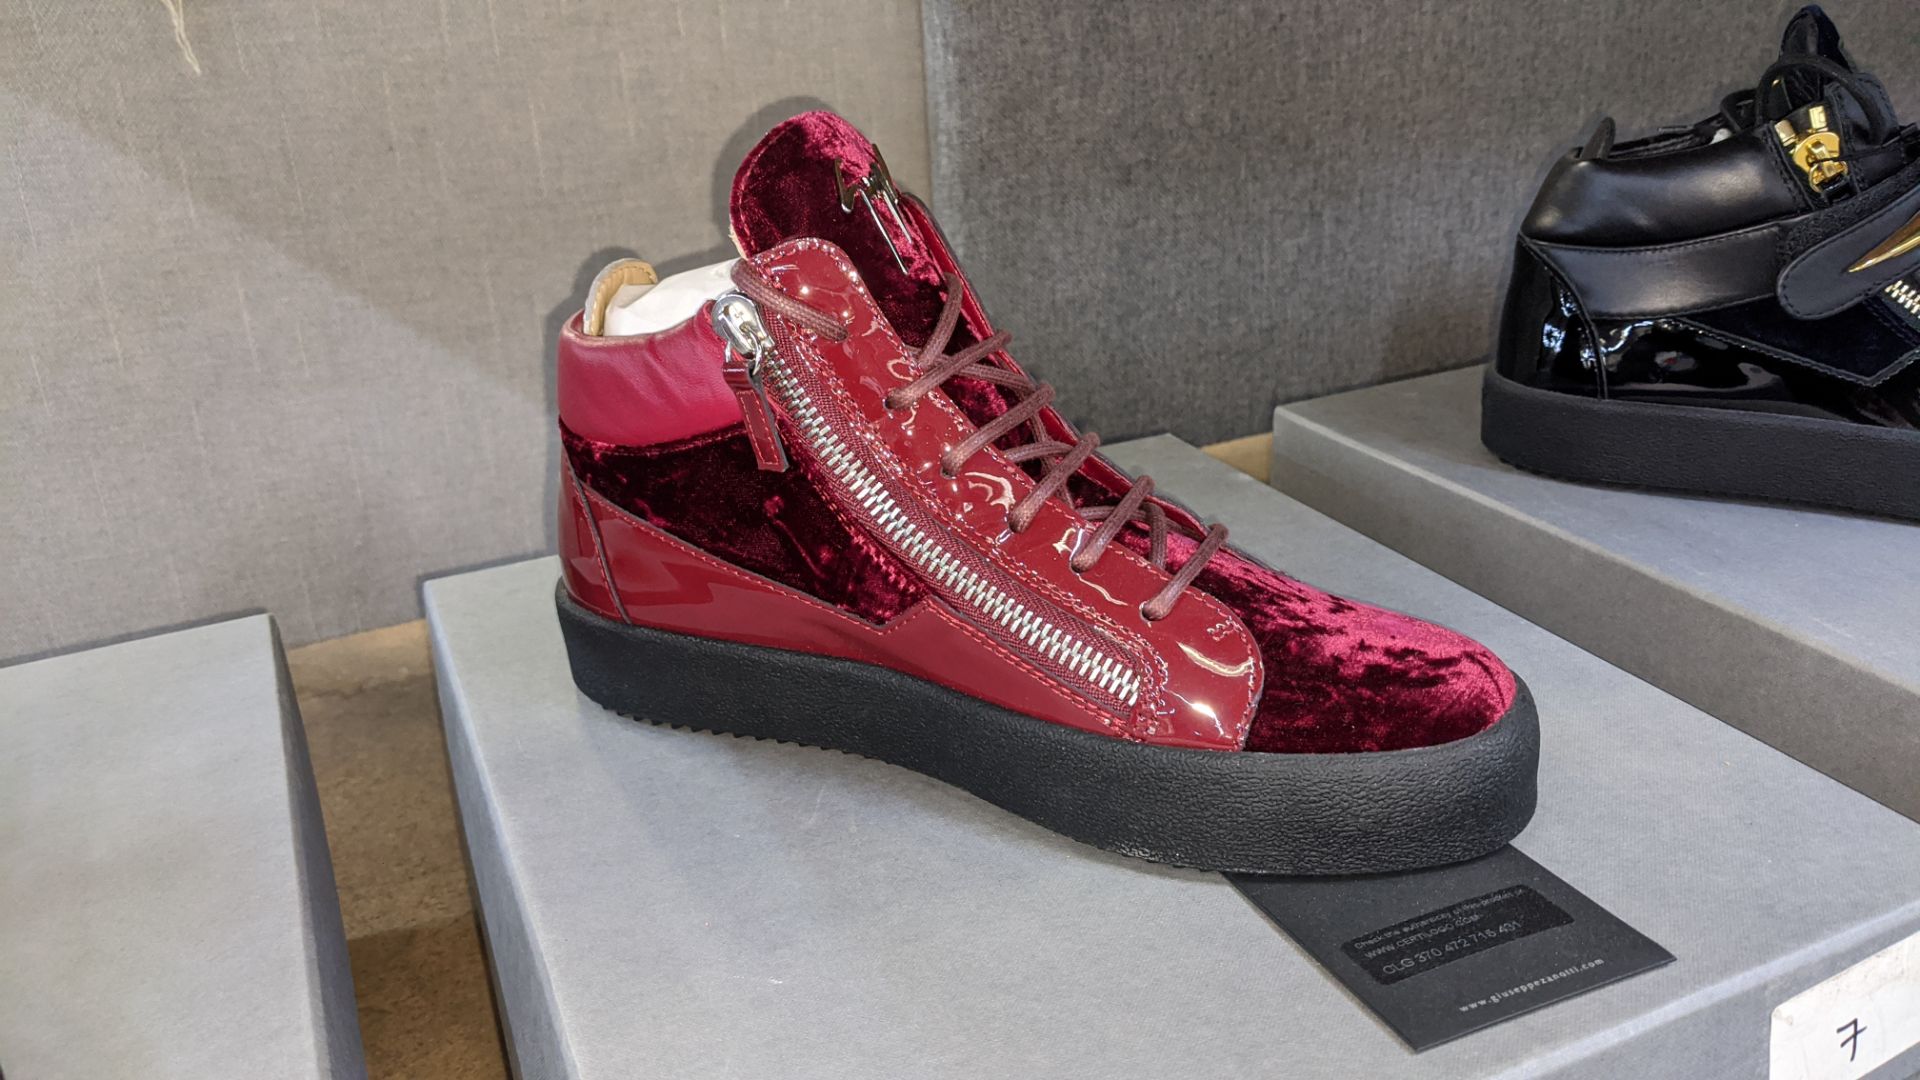 Pair of Giuseppe Zanotti High Top trainers, product code RU70010 colour Bordeaux (red) size EU41/ - Image 3 of 6